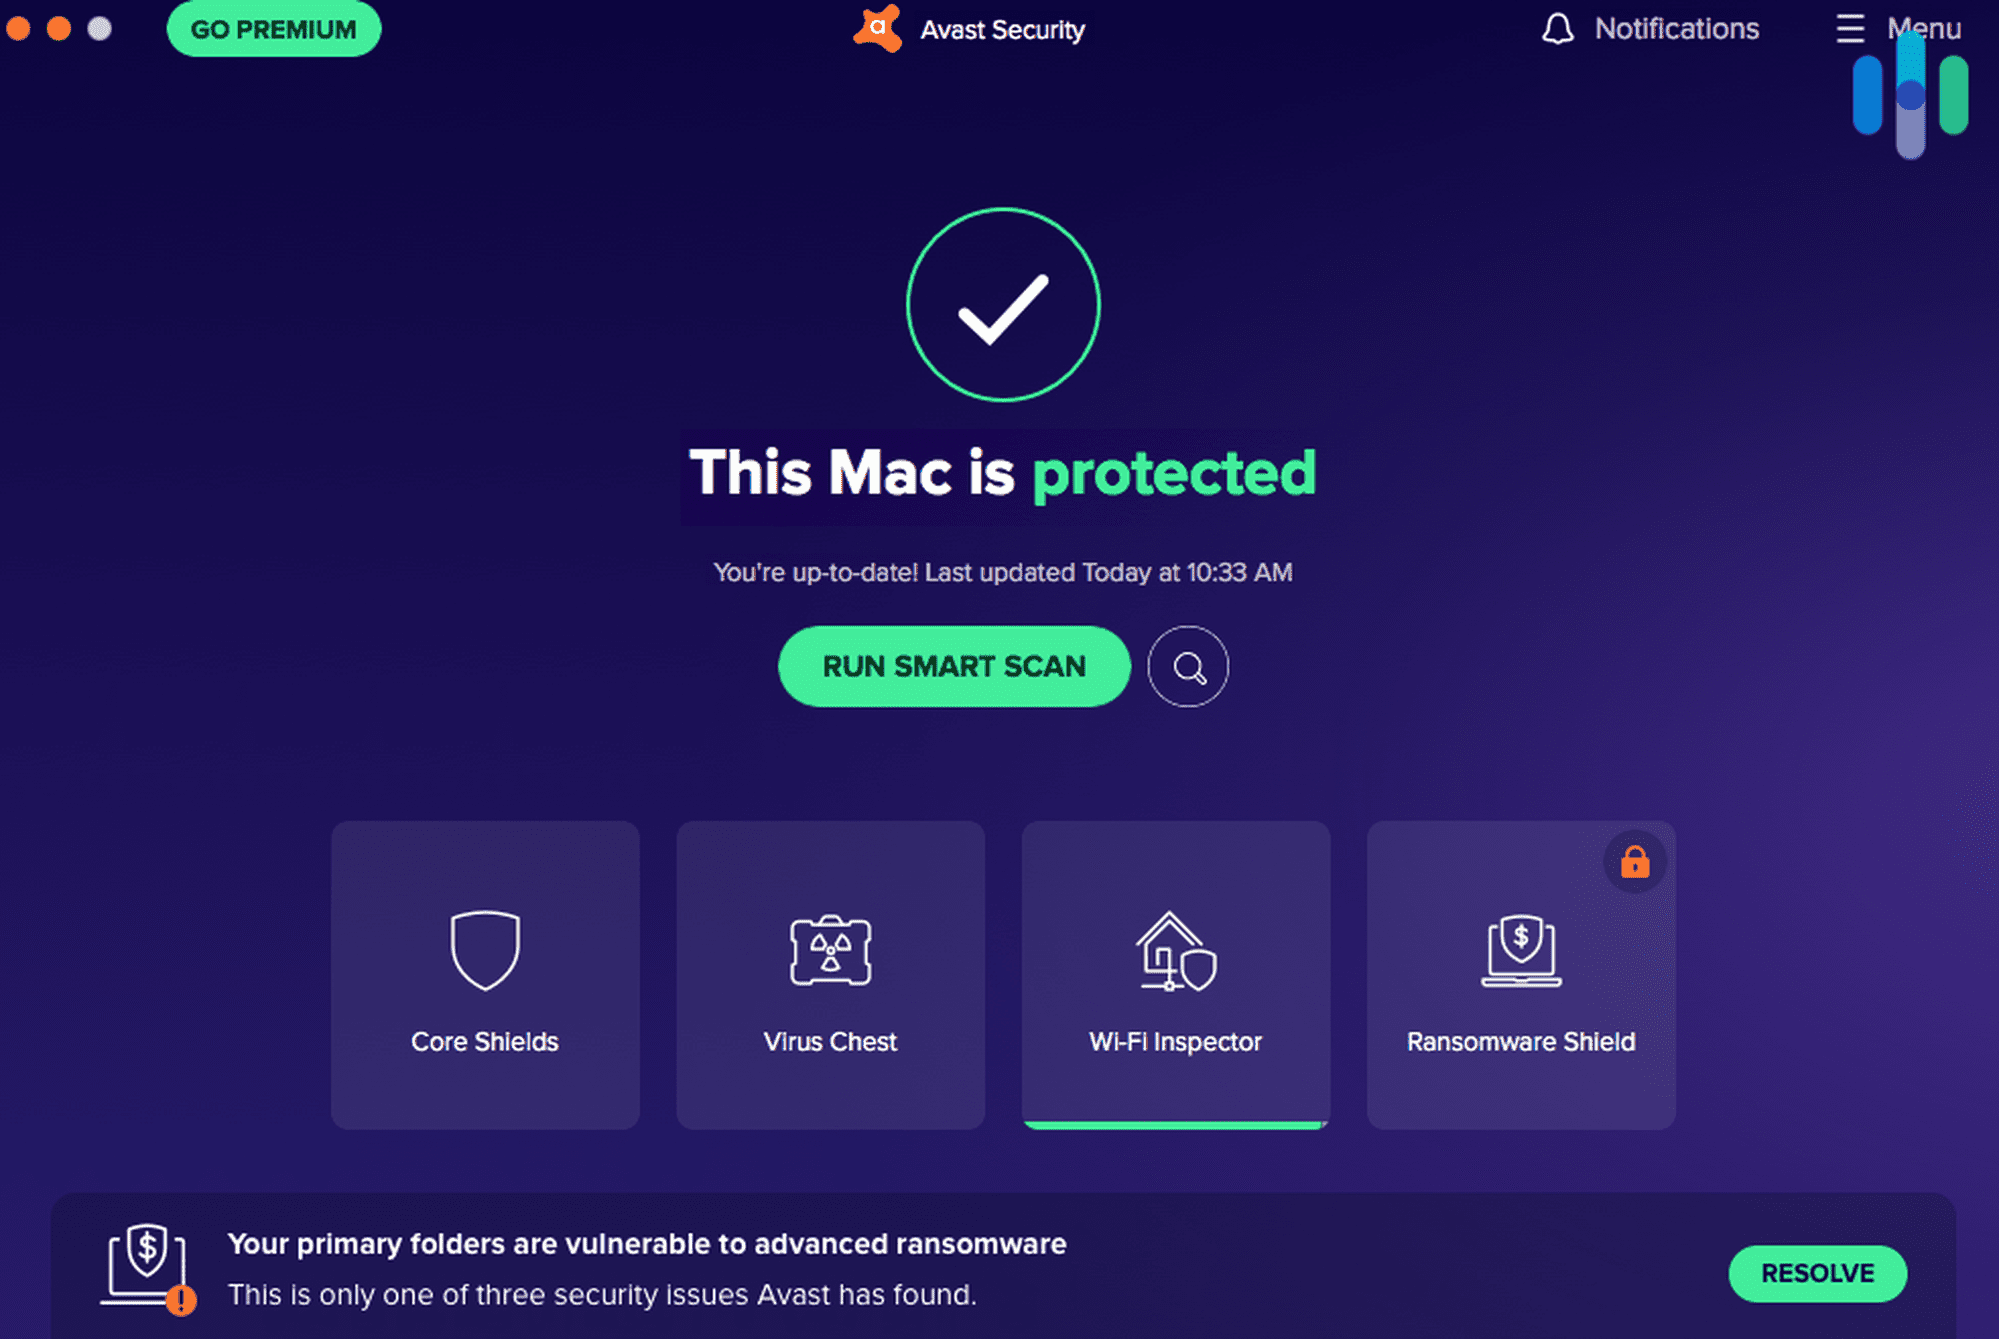 Install and run a reputable antivirus program on your computer.
Perform a full system scan and remove any detected malware.